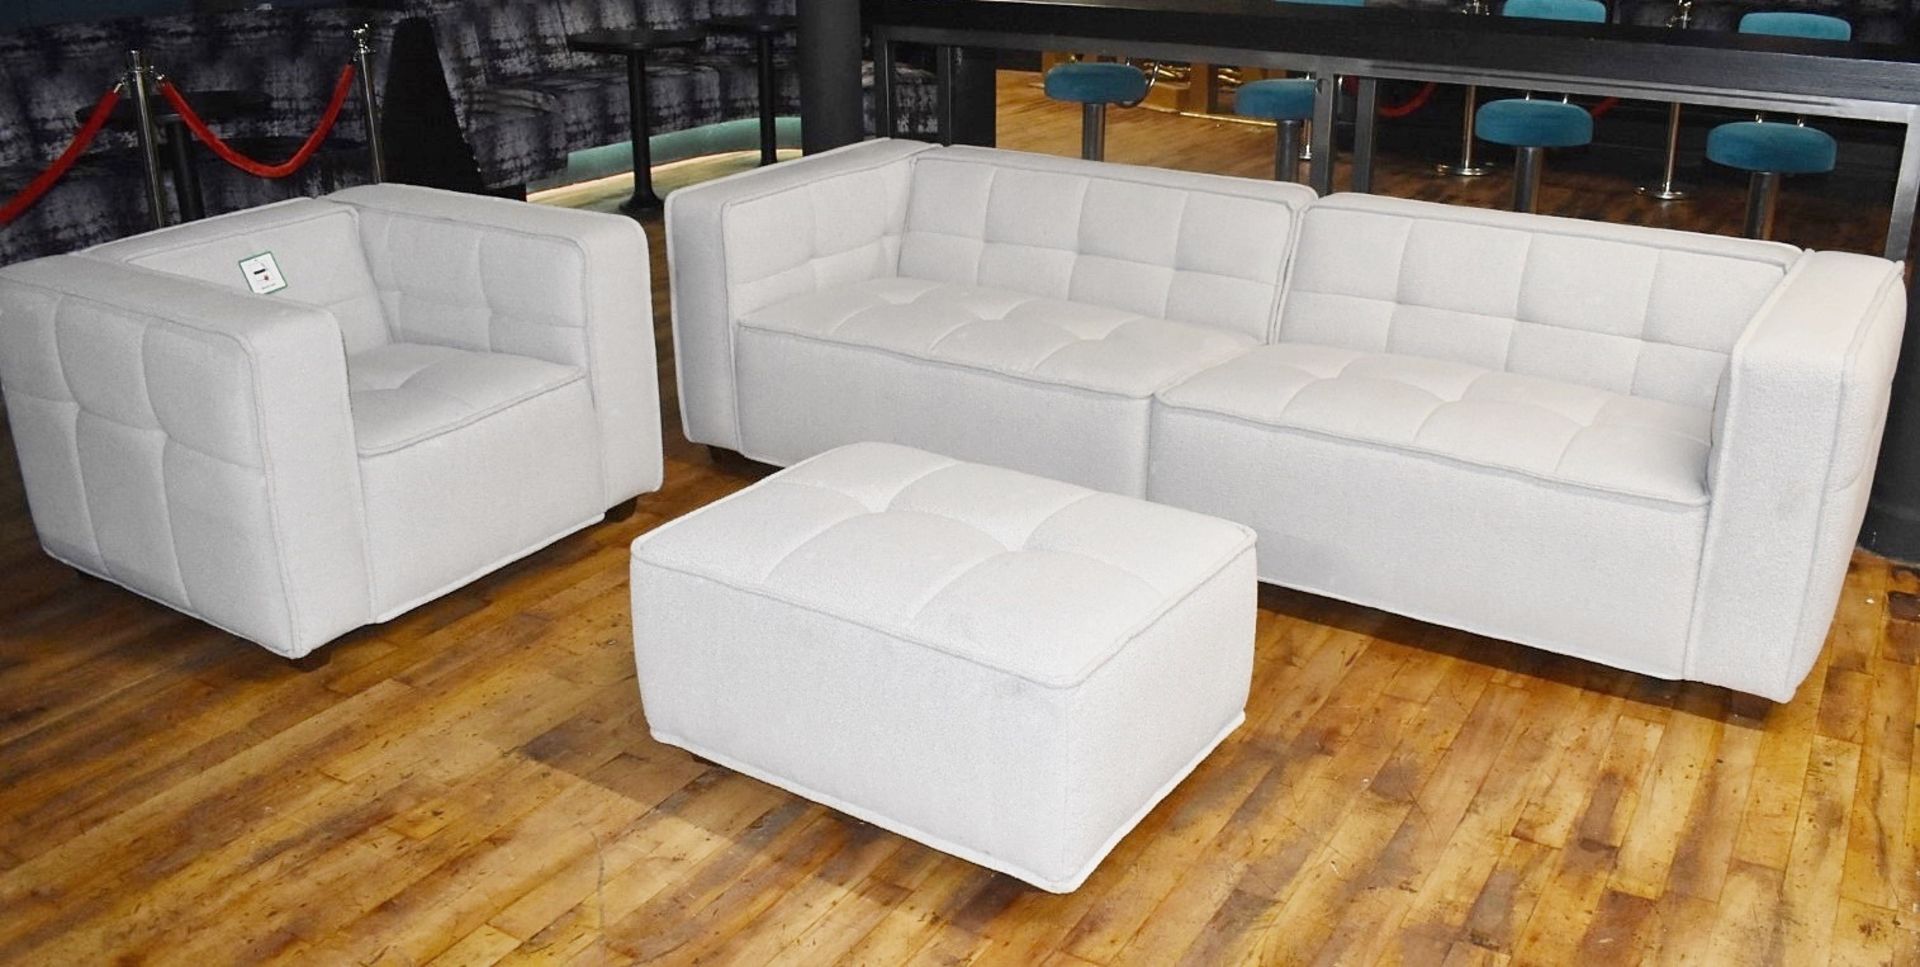 3-Piece Sofa Set, Upholstered with a Premium Upholstery in a Neutral Tone